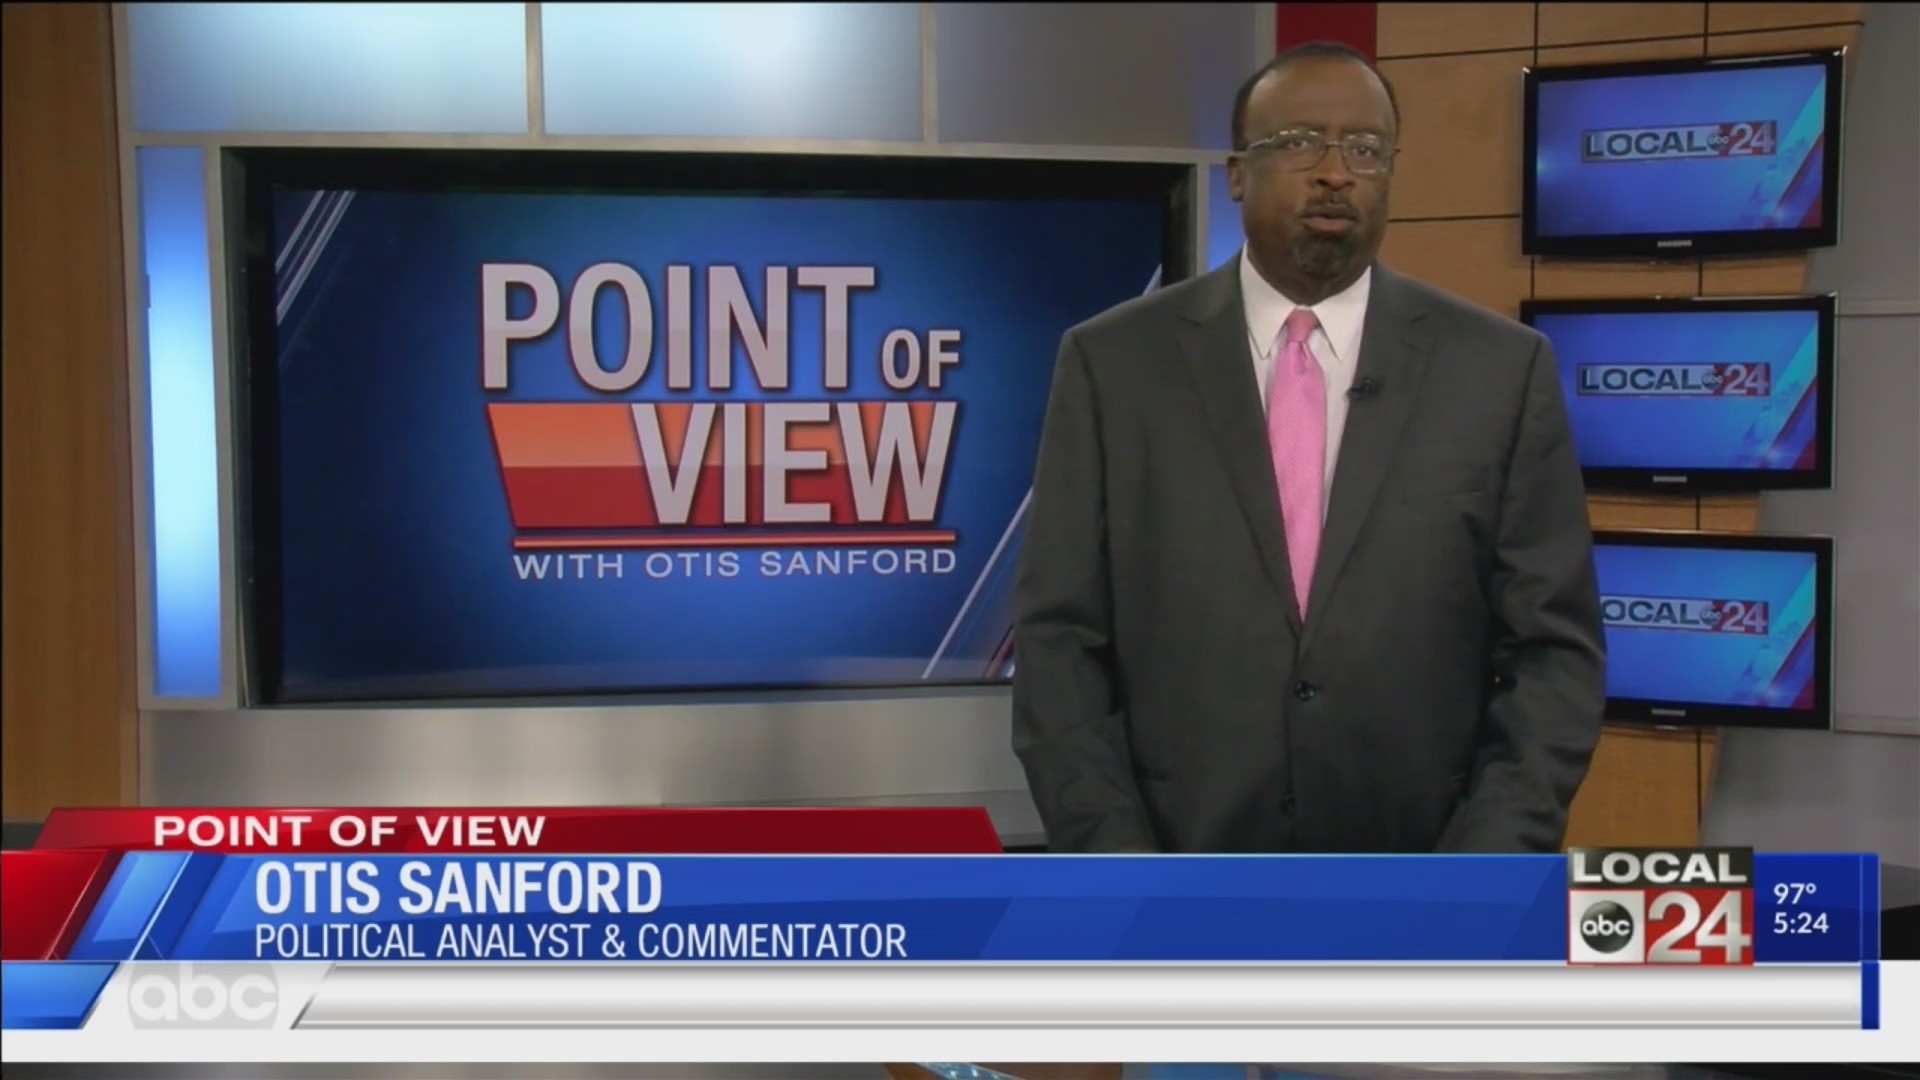 Local 24 News political analyst & commentator Otis Sanford on renaming local buildings